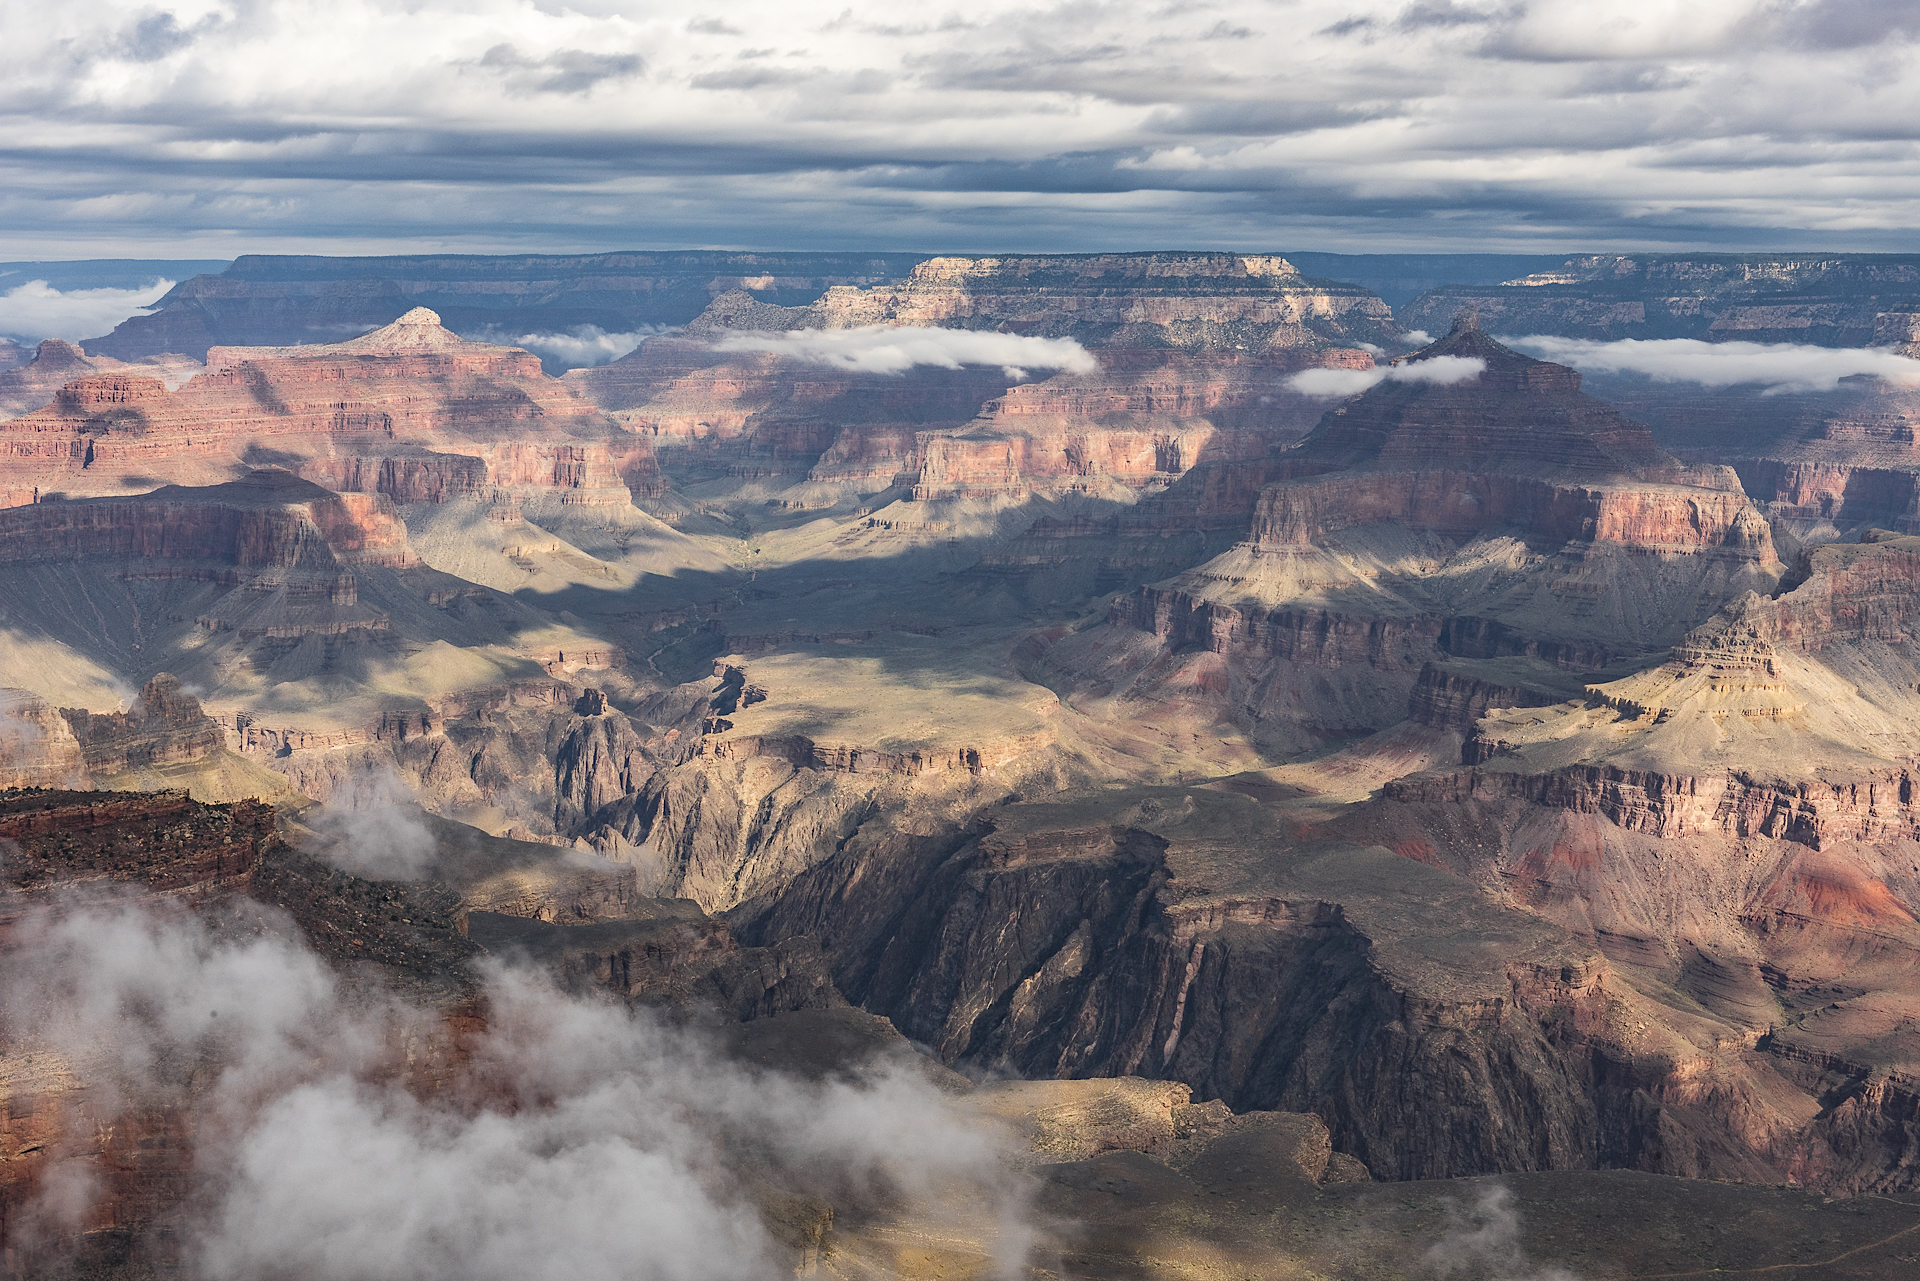 Morning clouds linger over the Grand Canyon at Yavapai Point